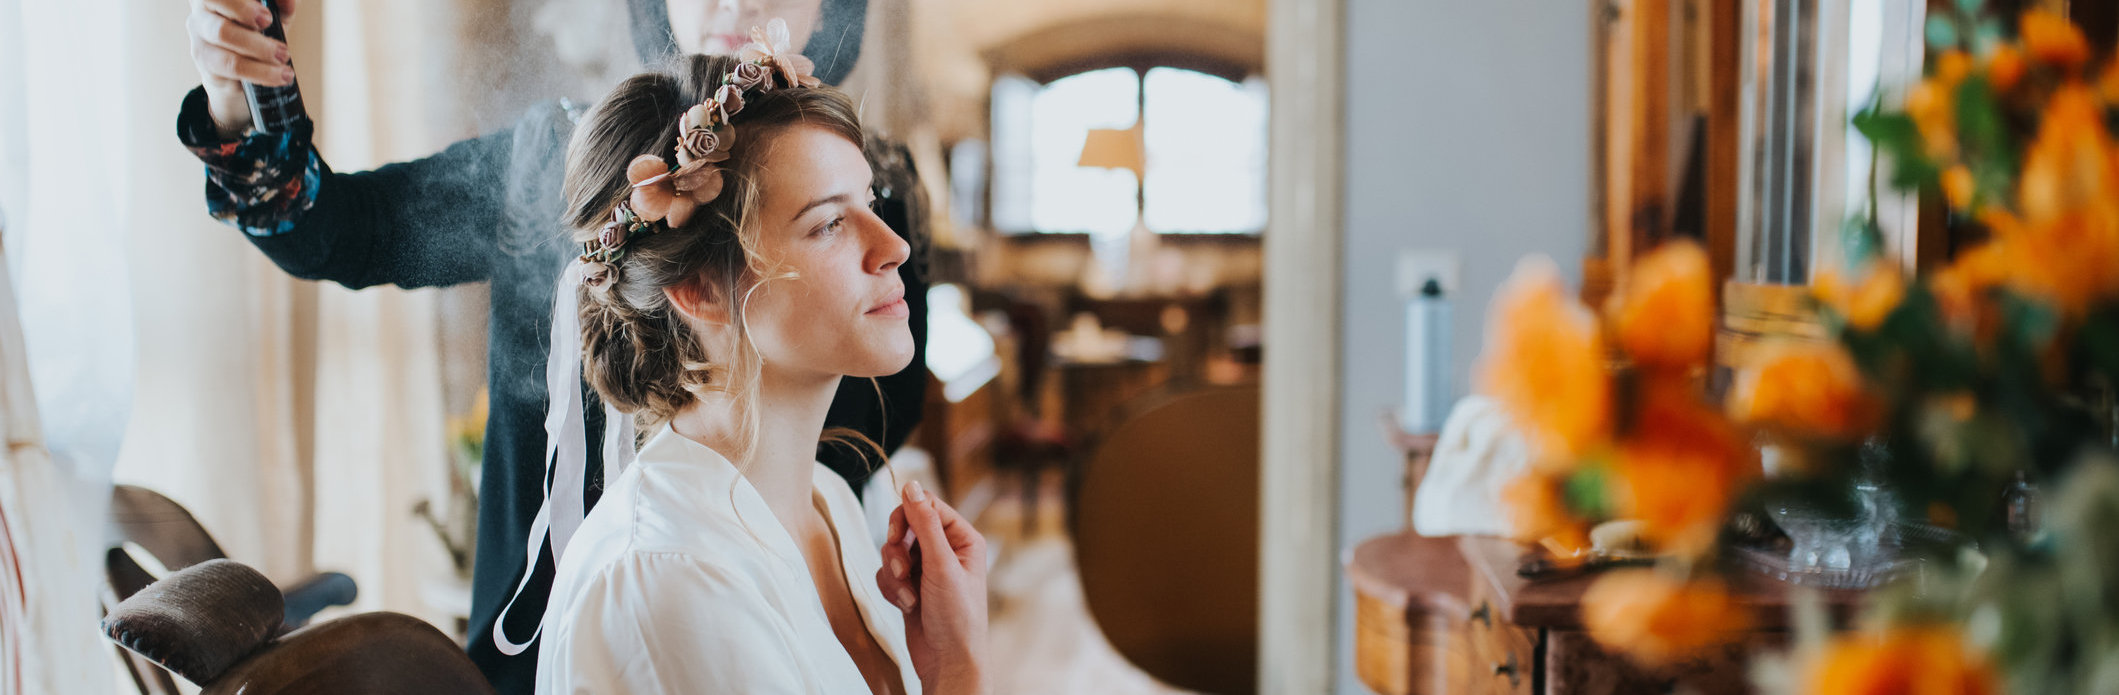 Wedding Hairstyles, Beauty & Make-up Artists